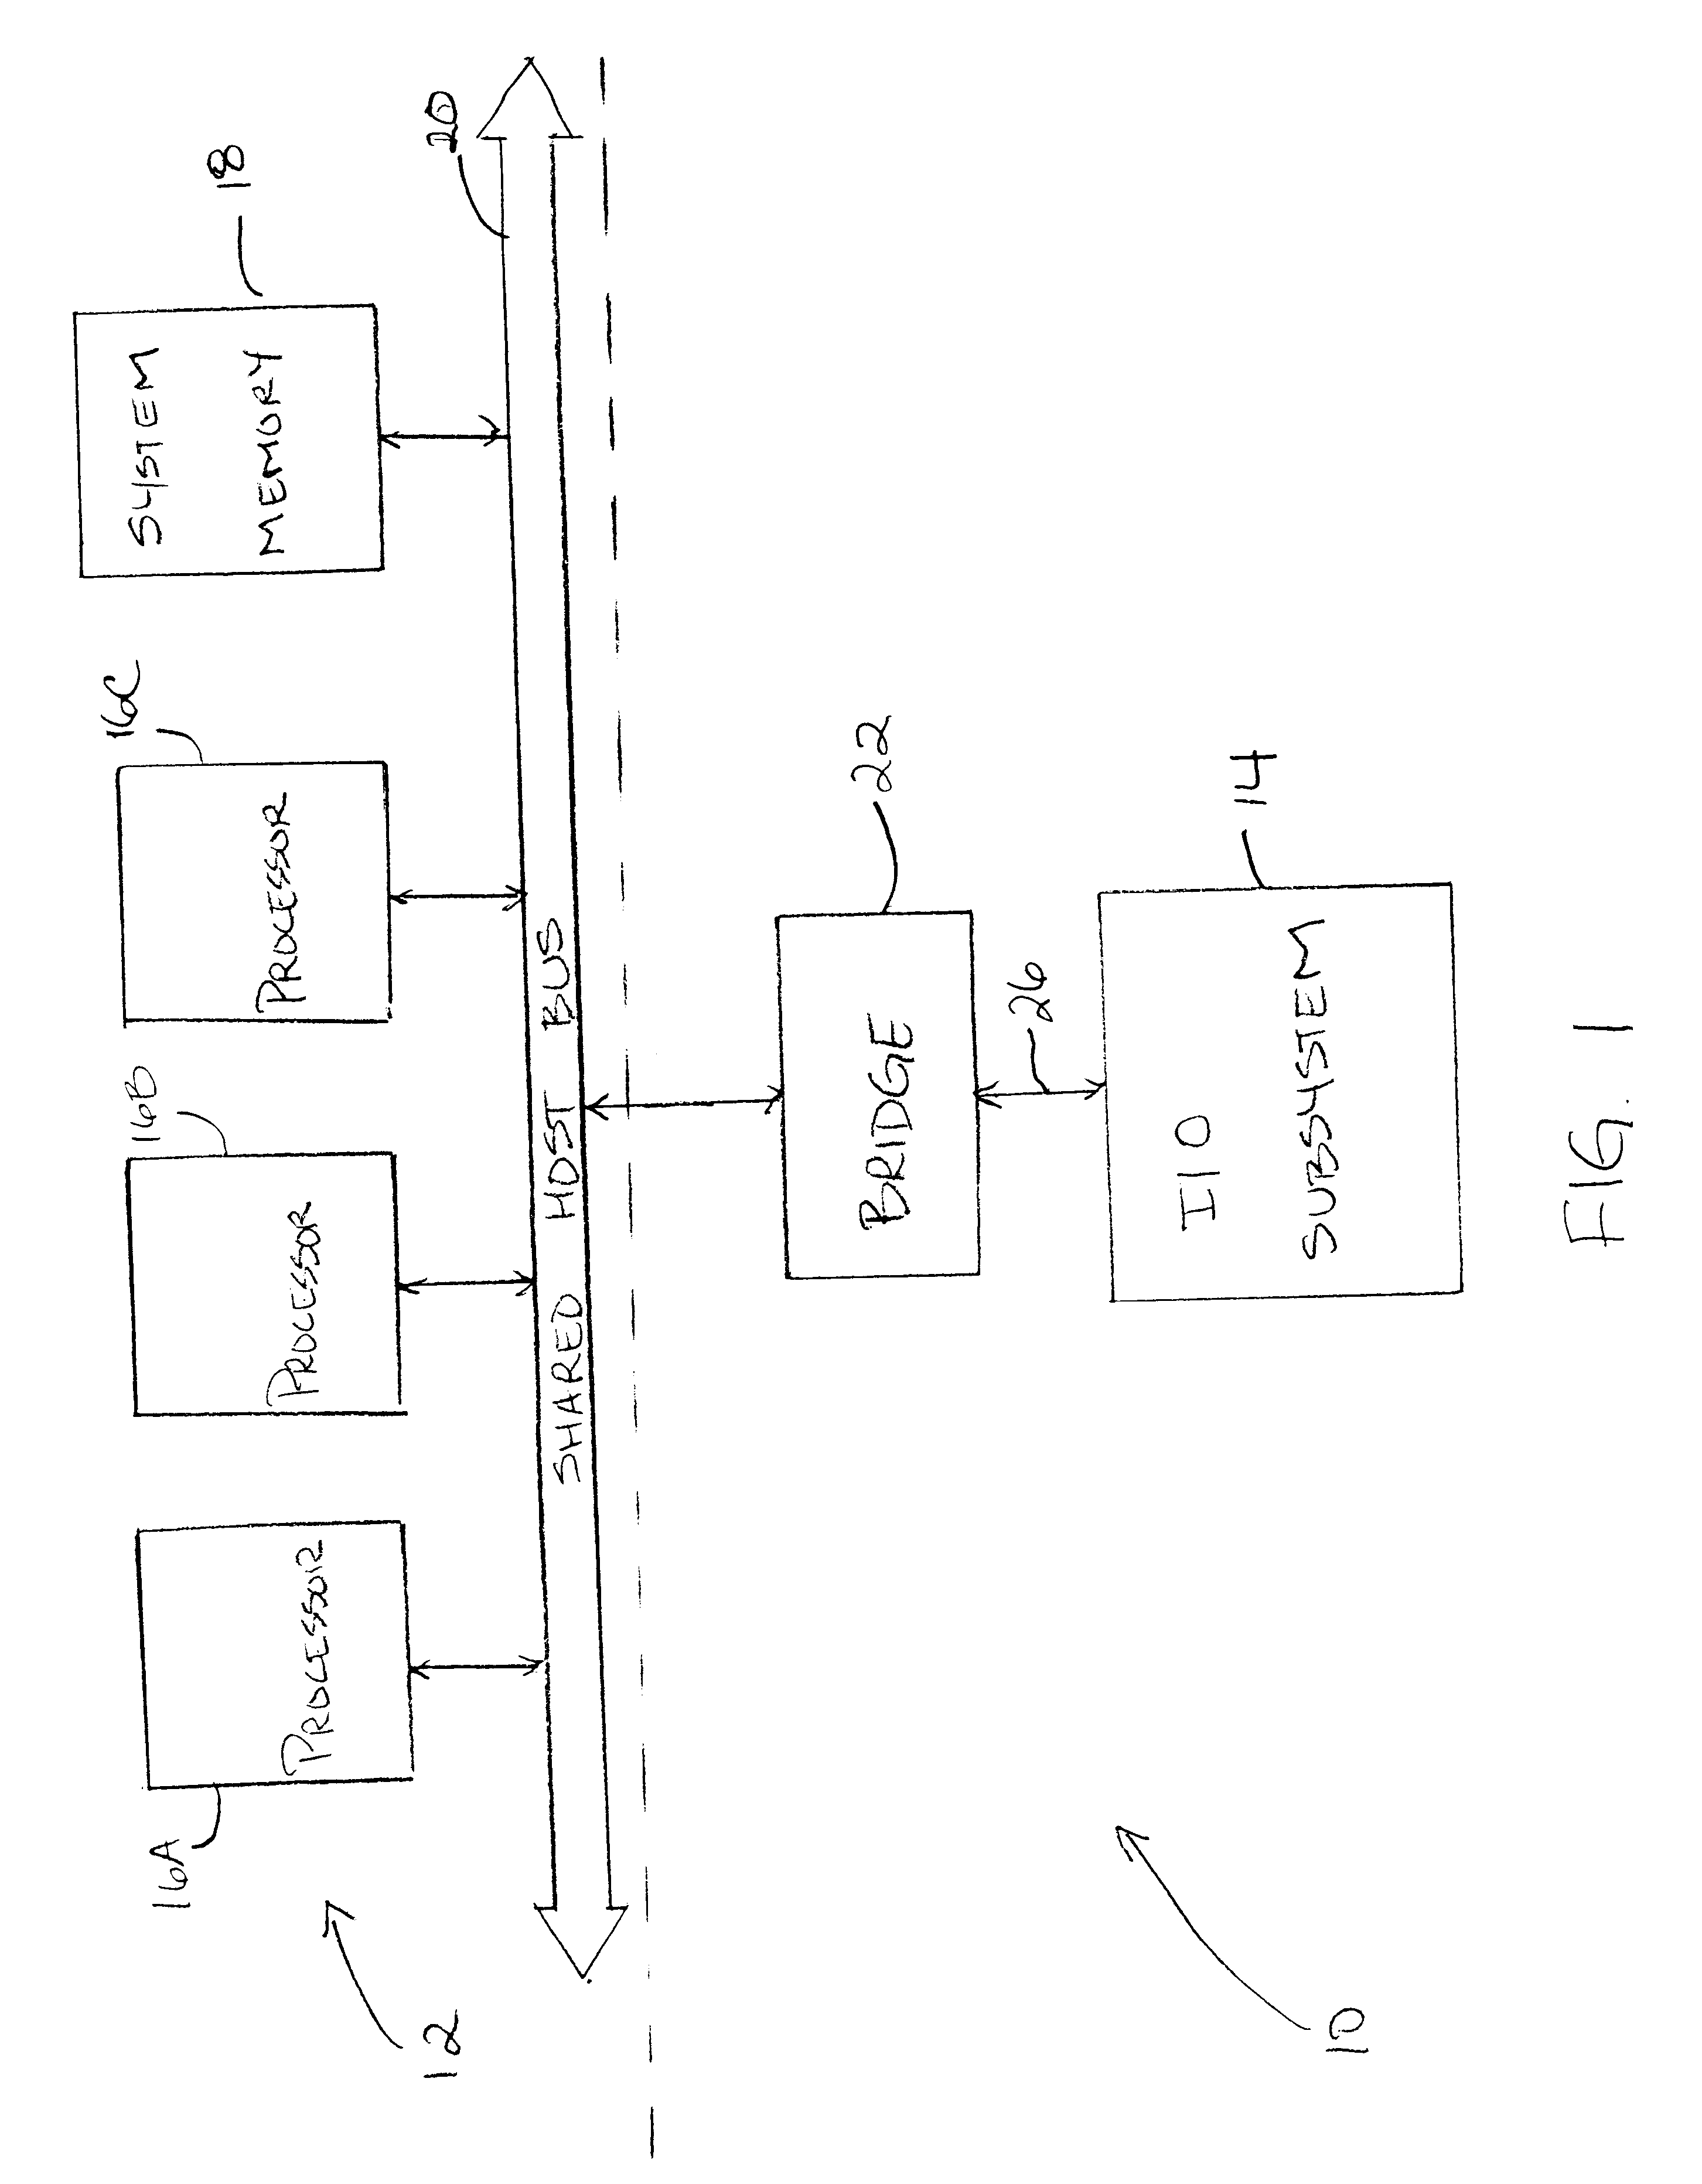 System and method of allocating bandwidth to a plurality of devices interconnected by a plurality of point-to-point communication links